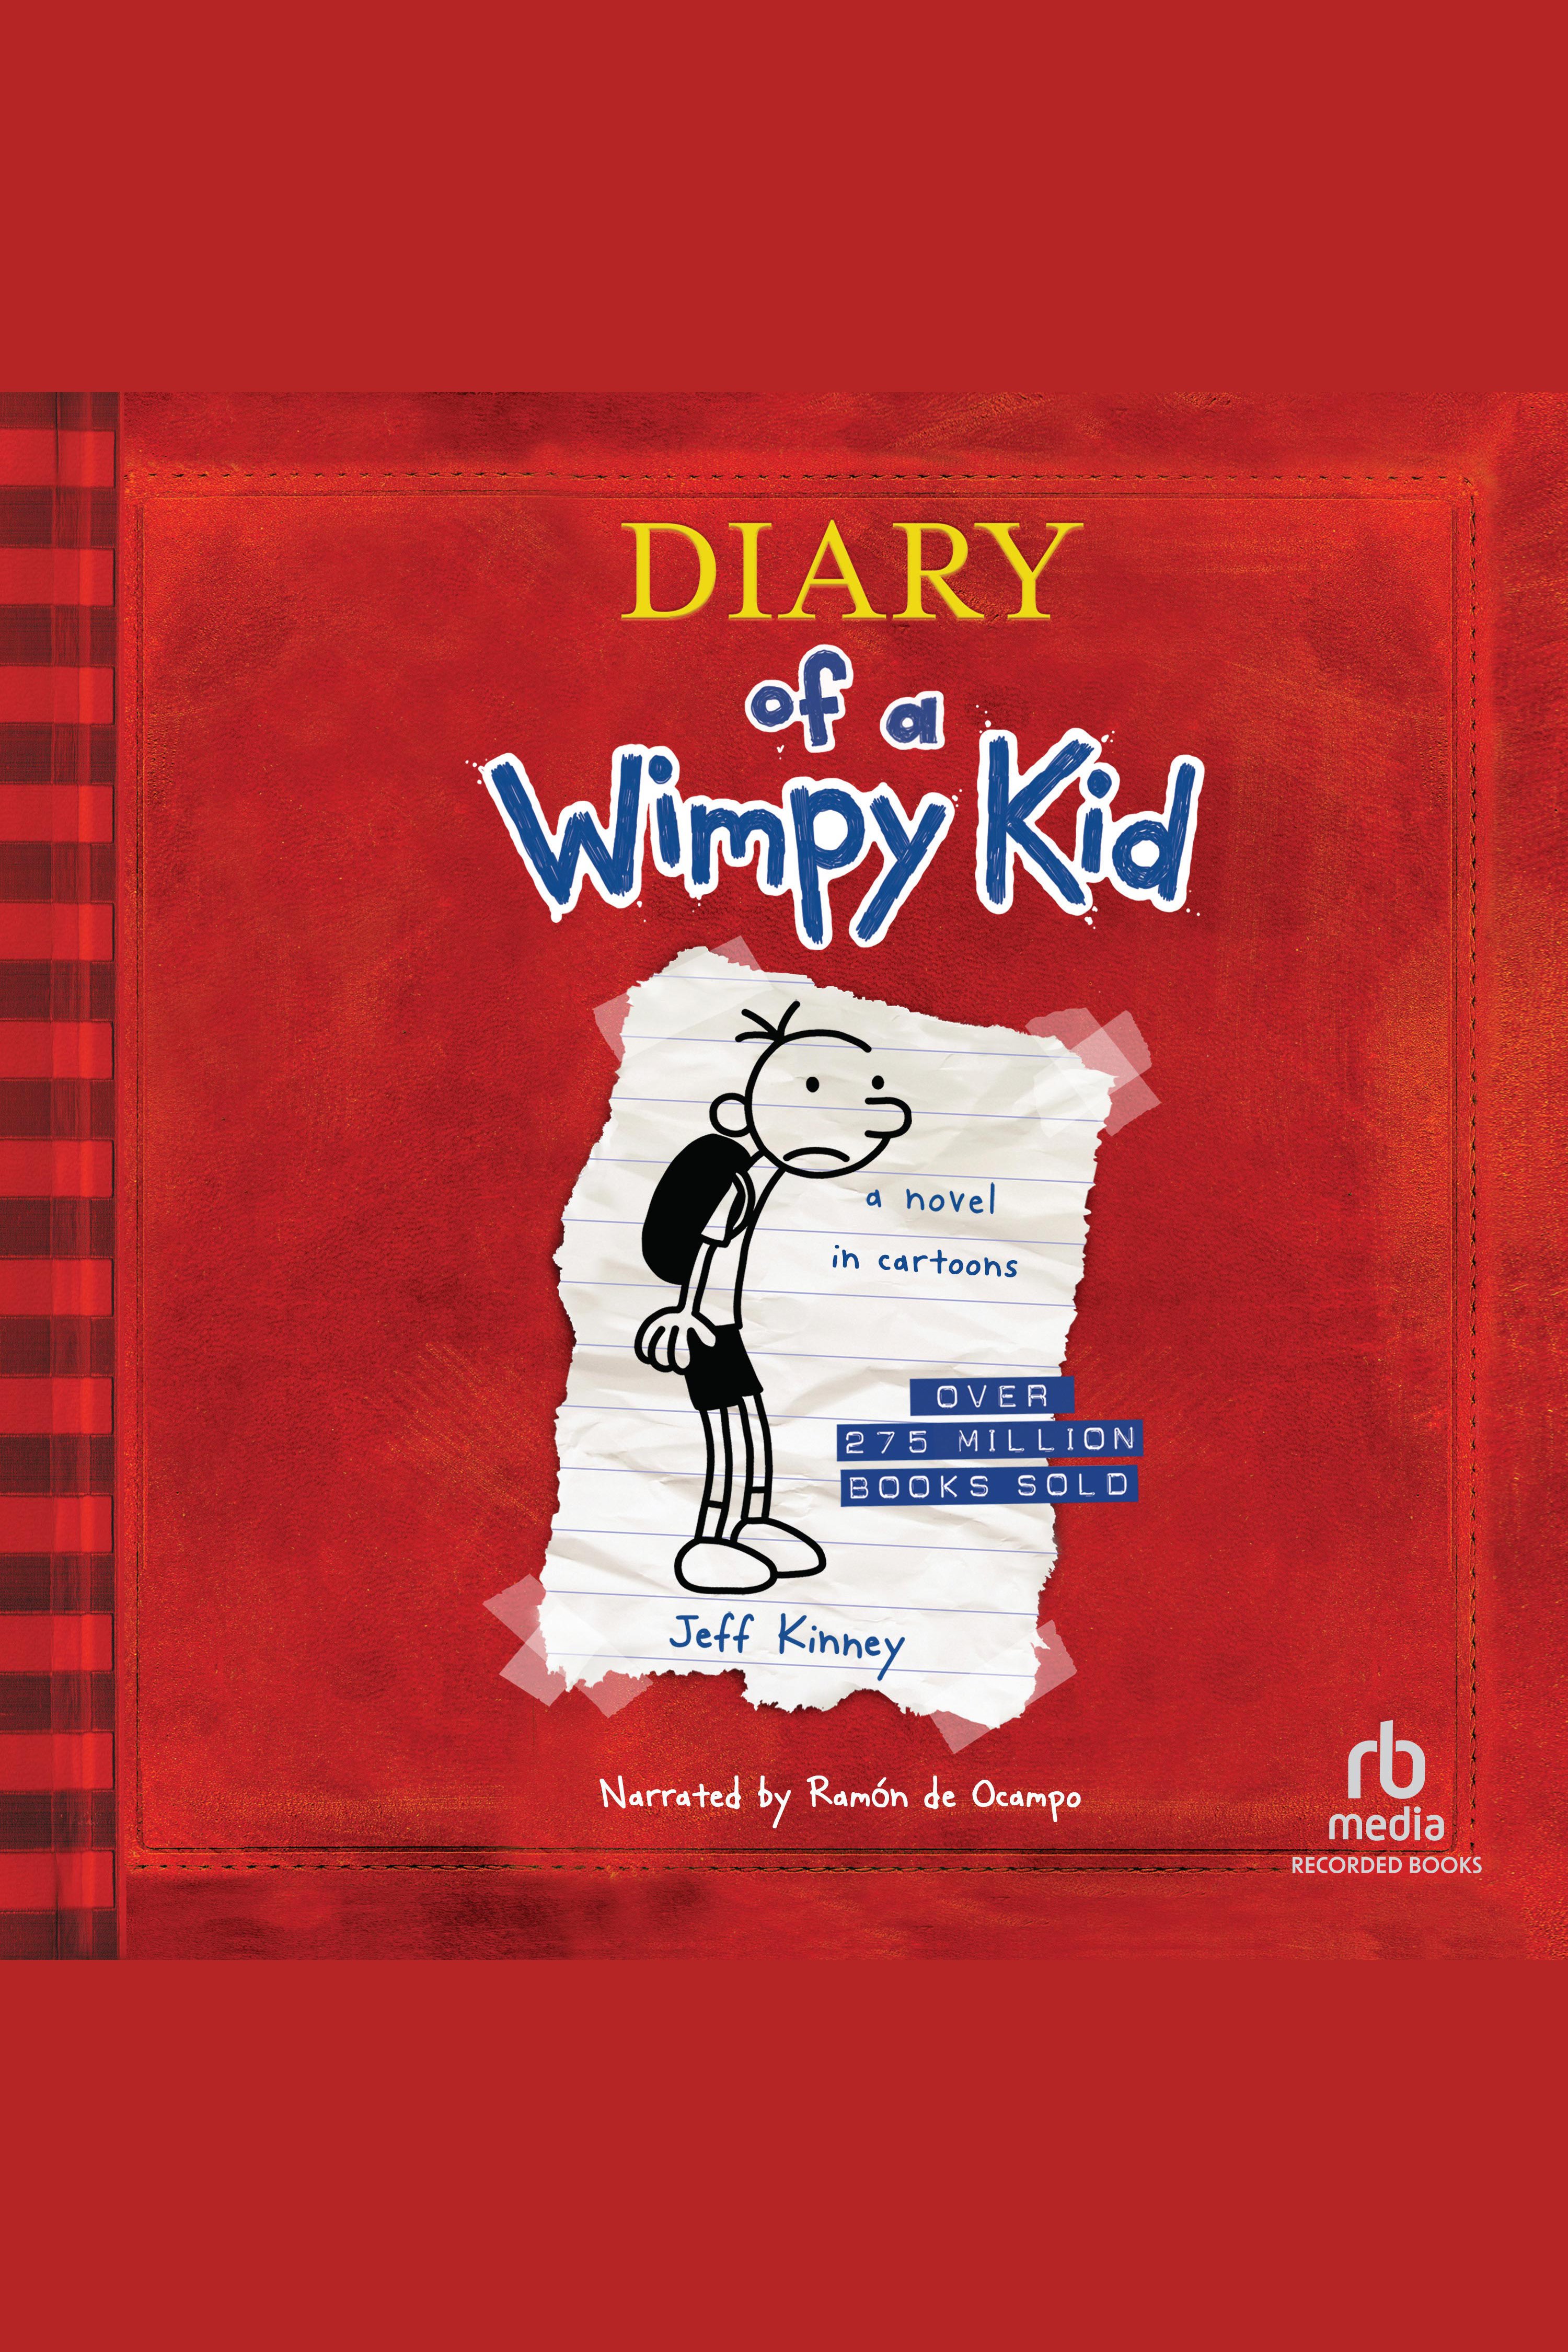 Diary of a Wimpy Kid cover image